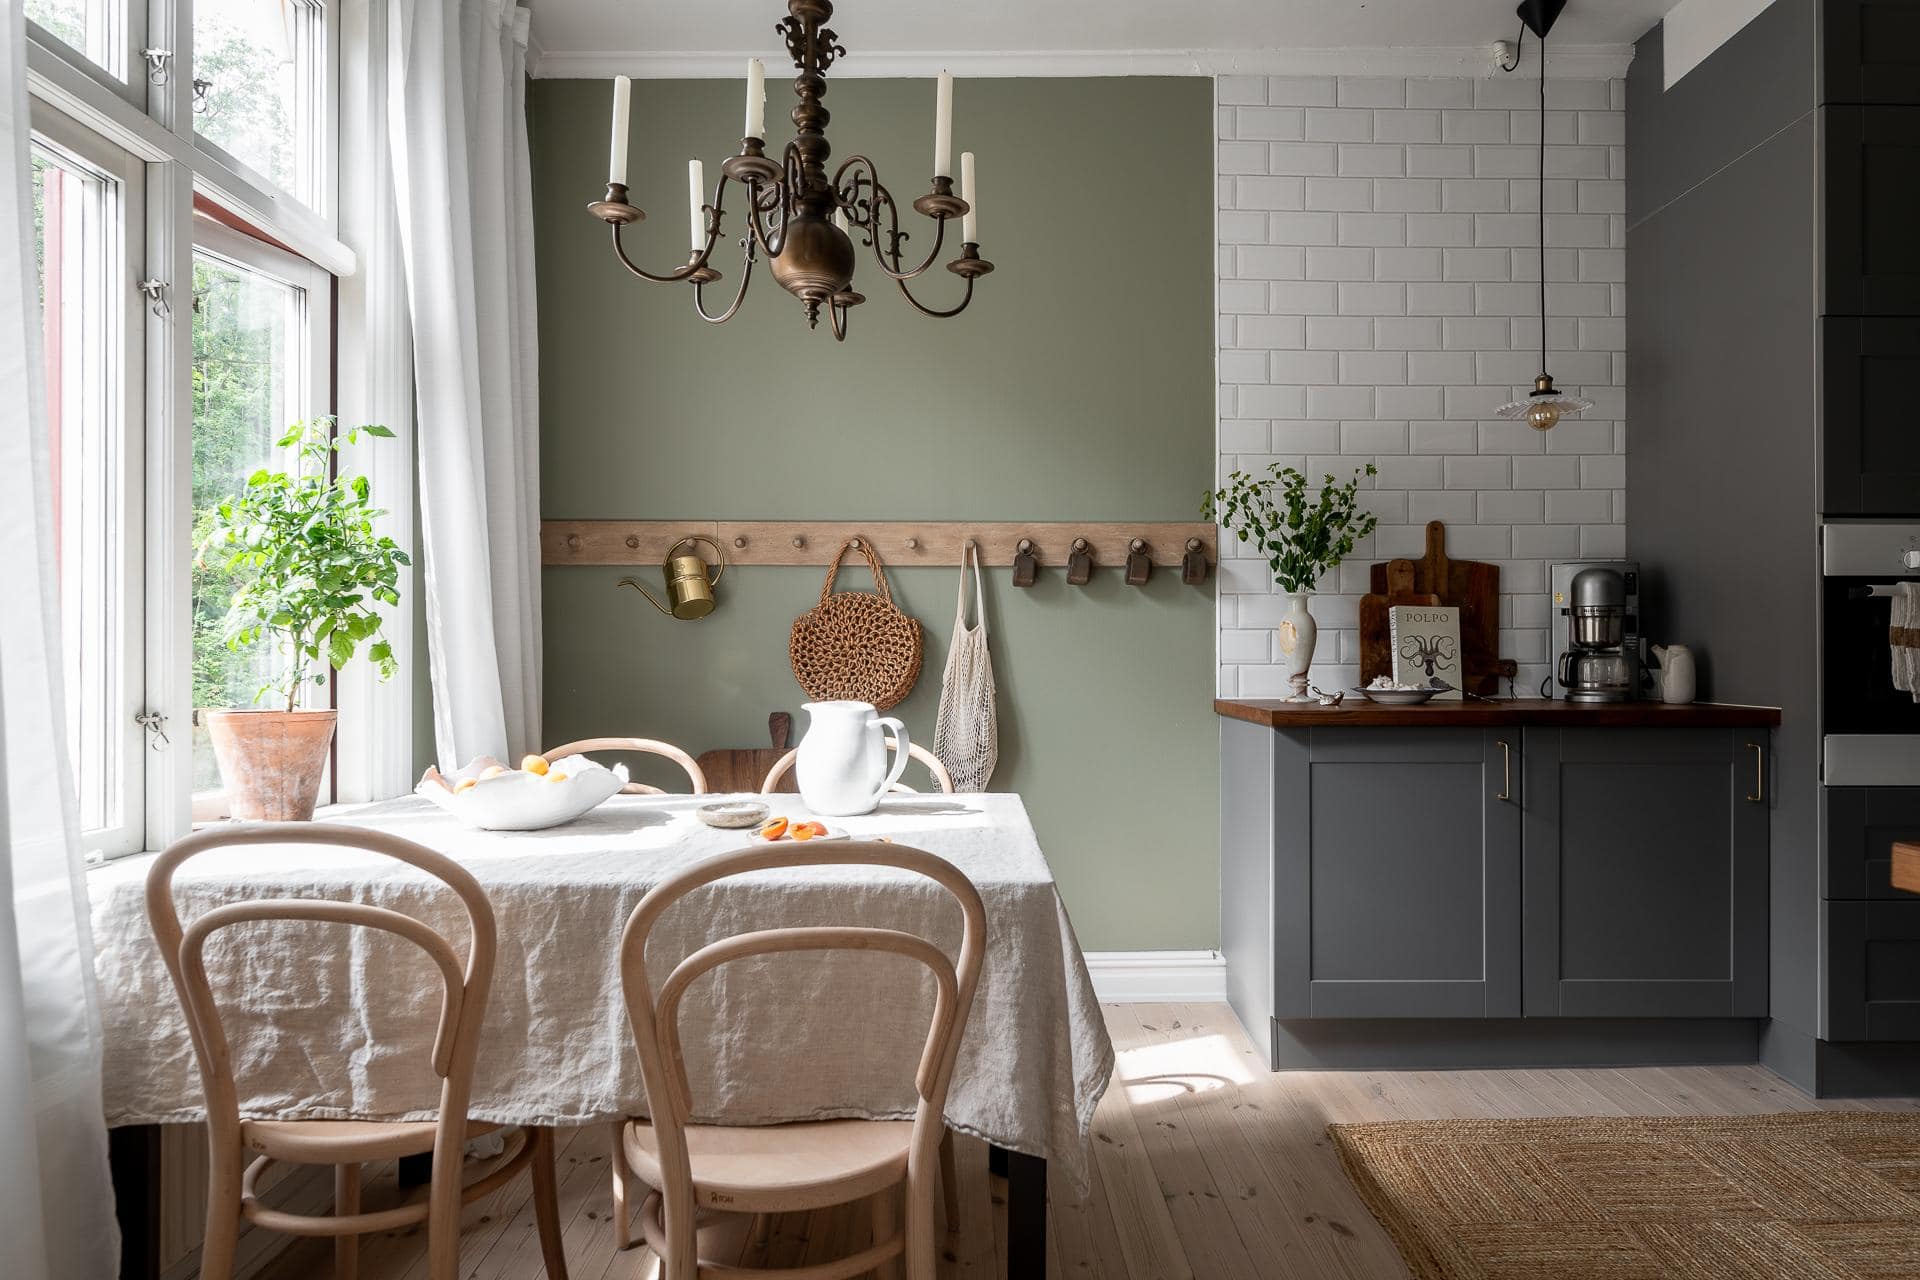 Grey kitchen cabinets against sage green walls in an attic apartment - COCO  LAPINE DESIGNCOCO LAPINE DESIGN